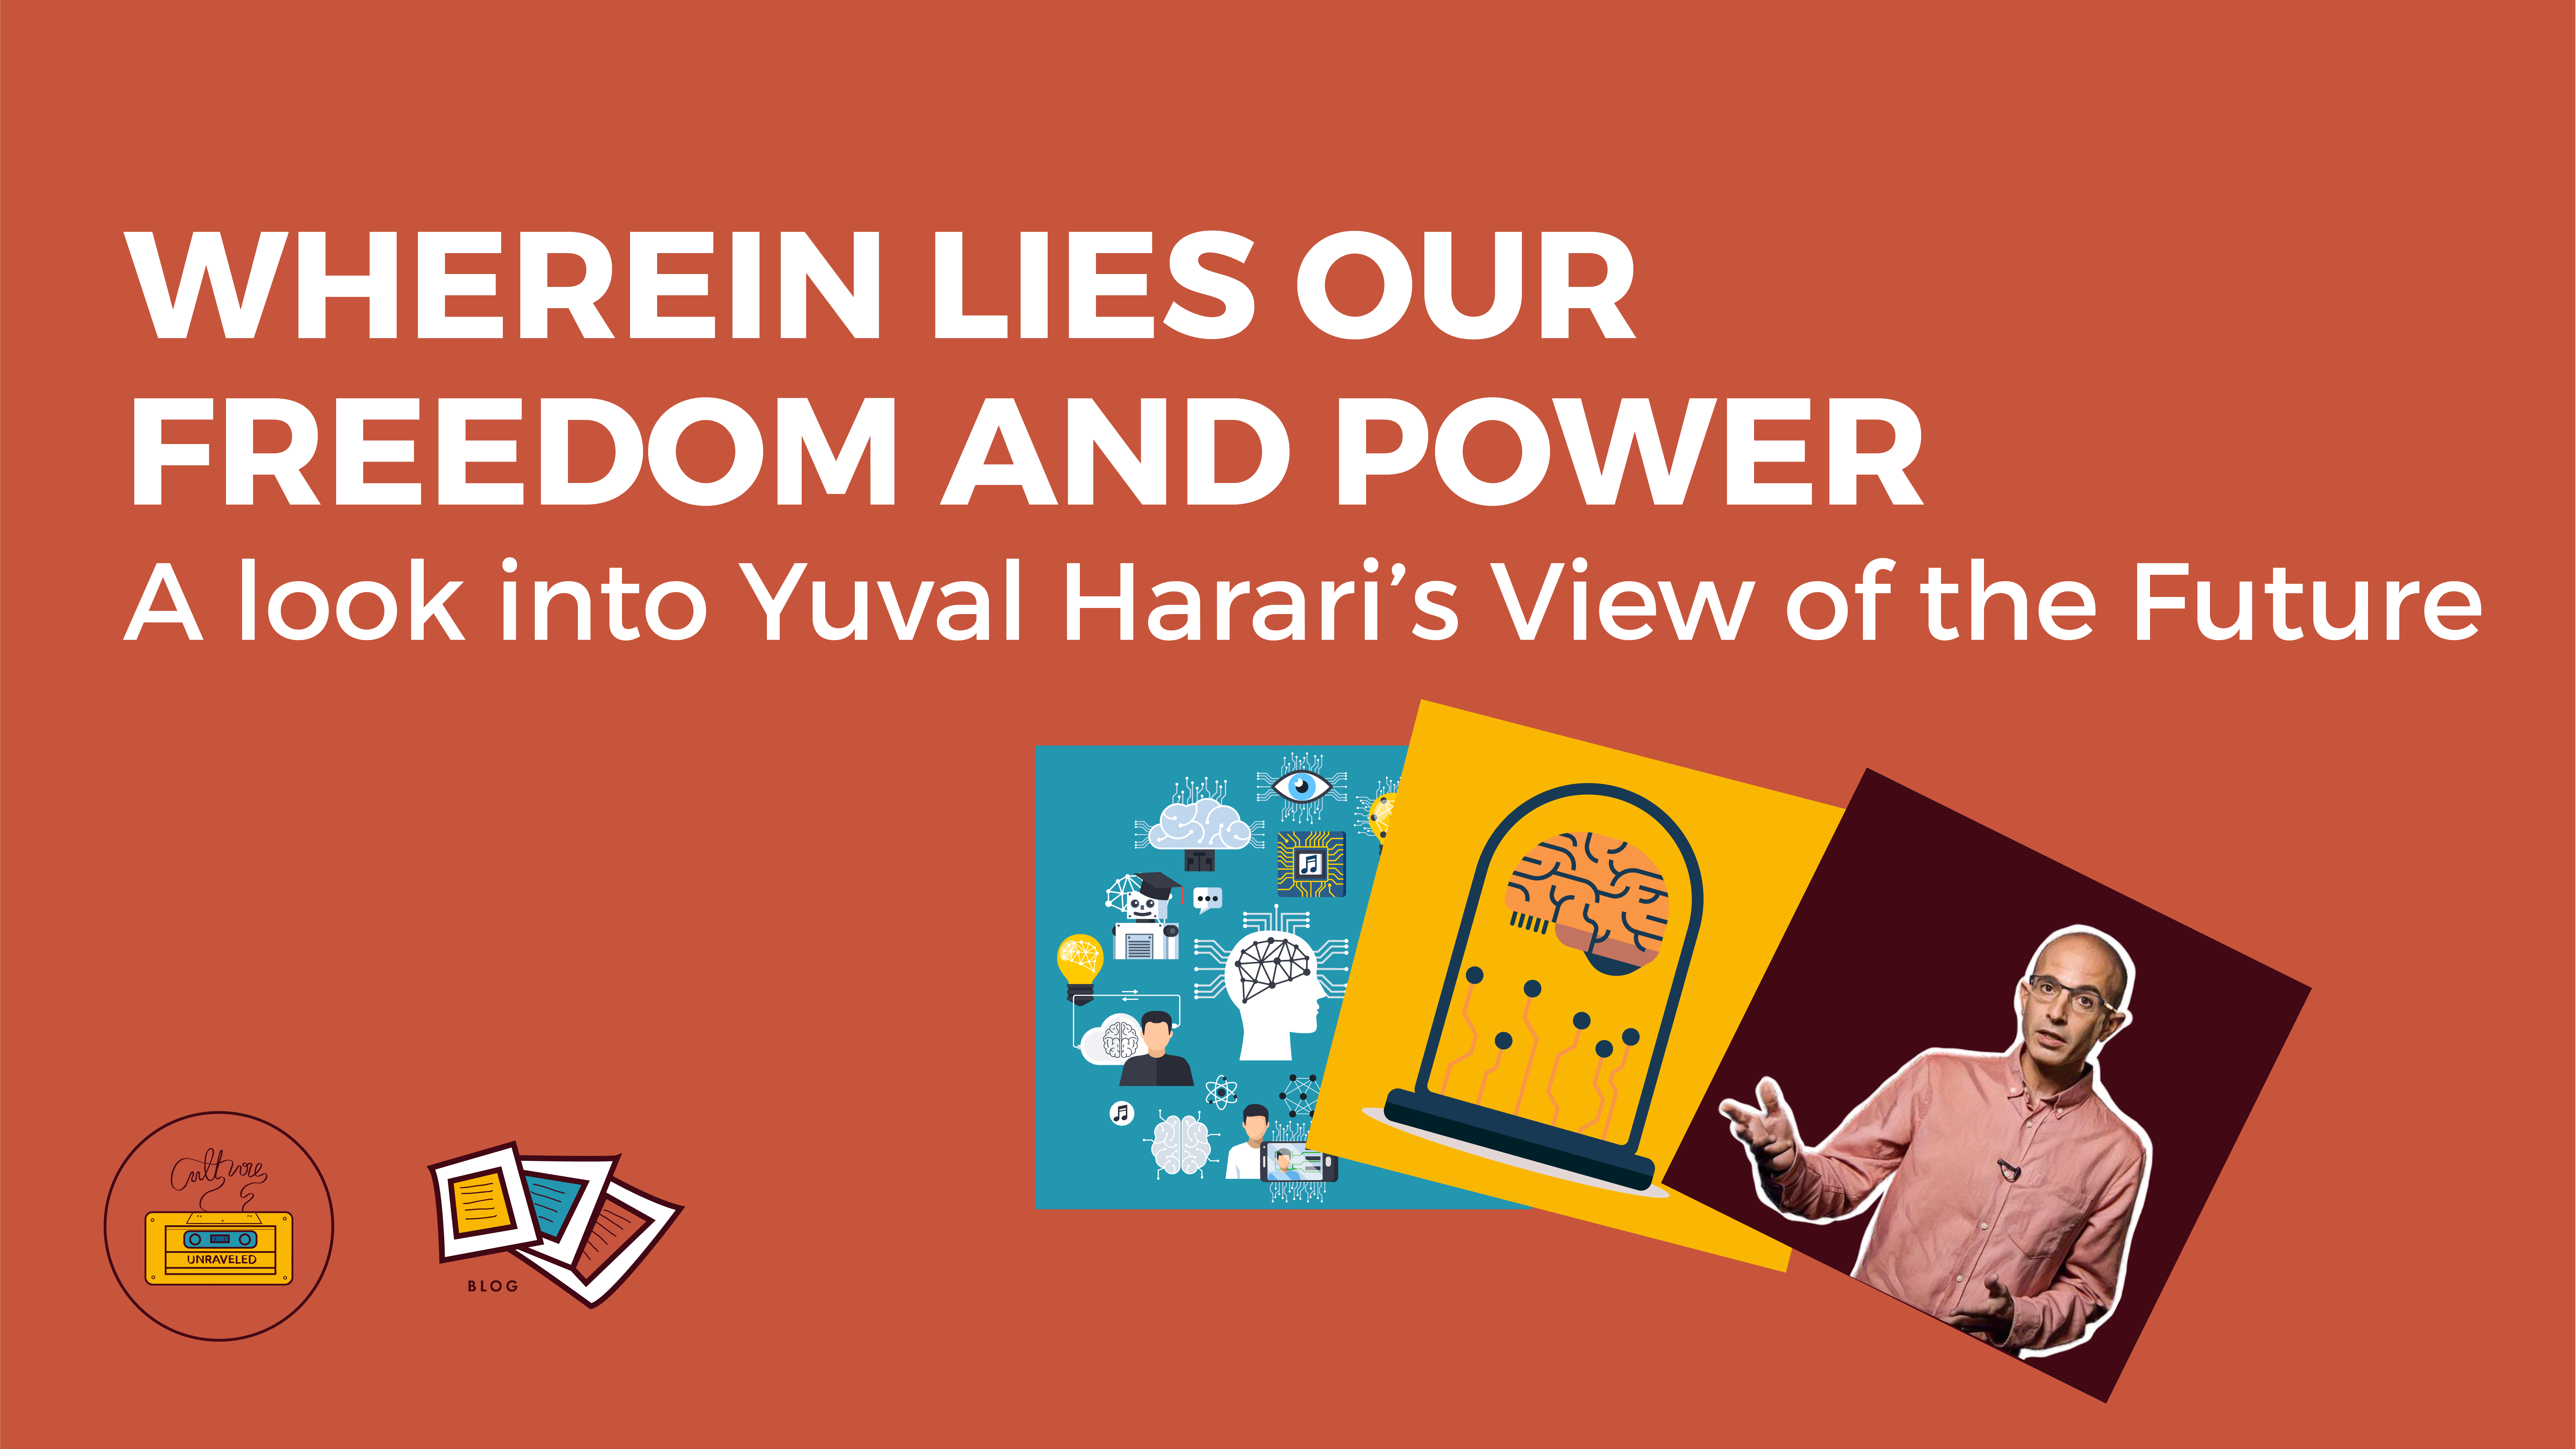 Wherein lies our Freedom and Power. A Look into Yuval Harari’s View of the Future